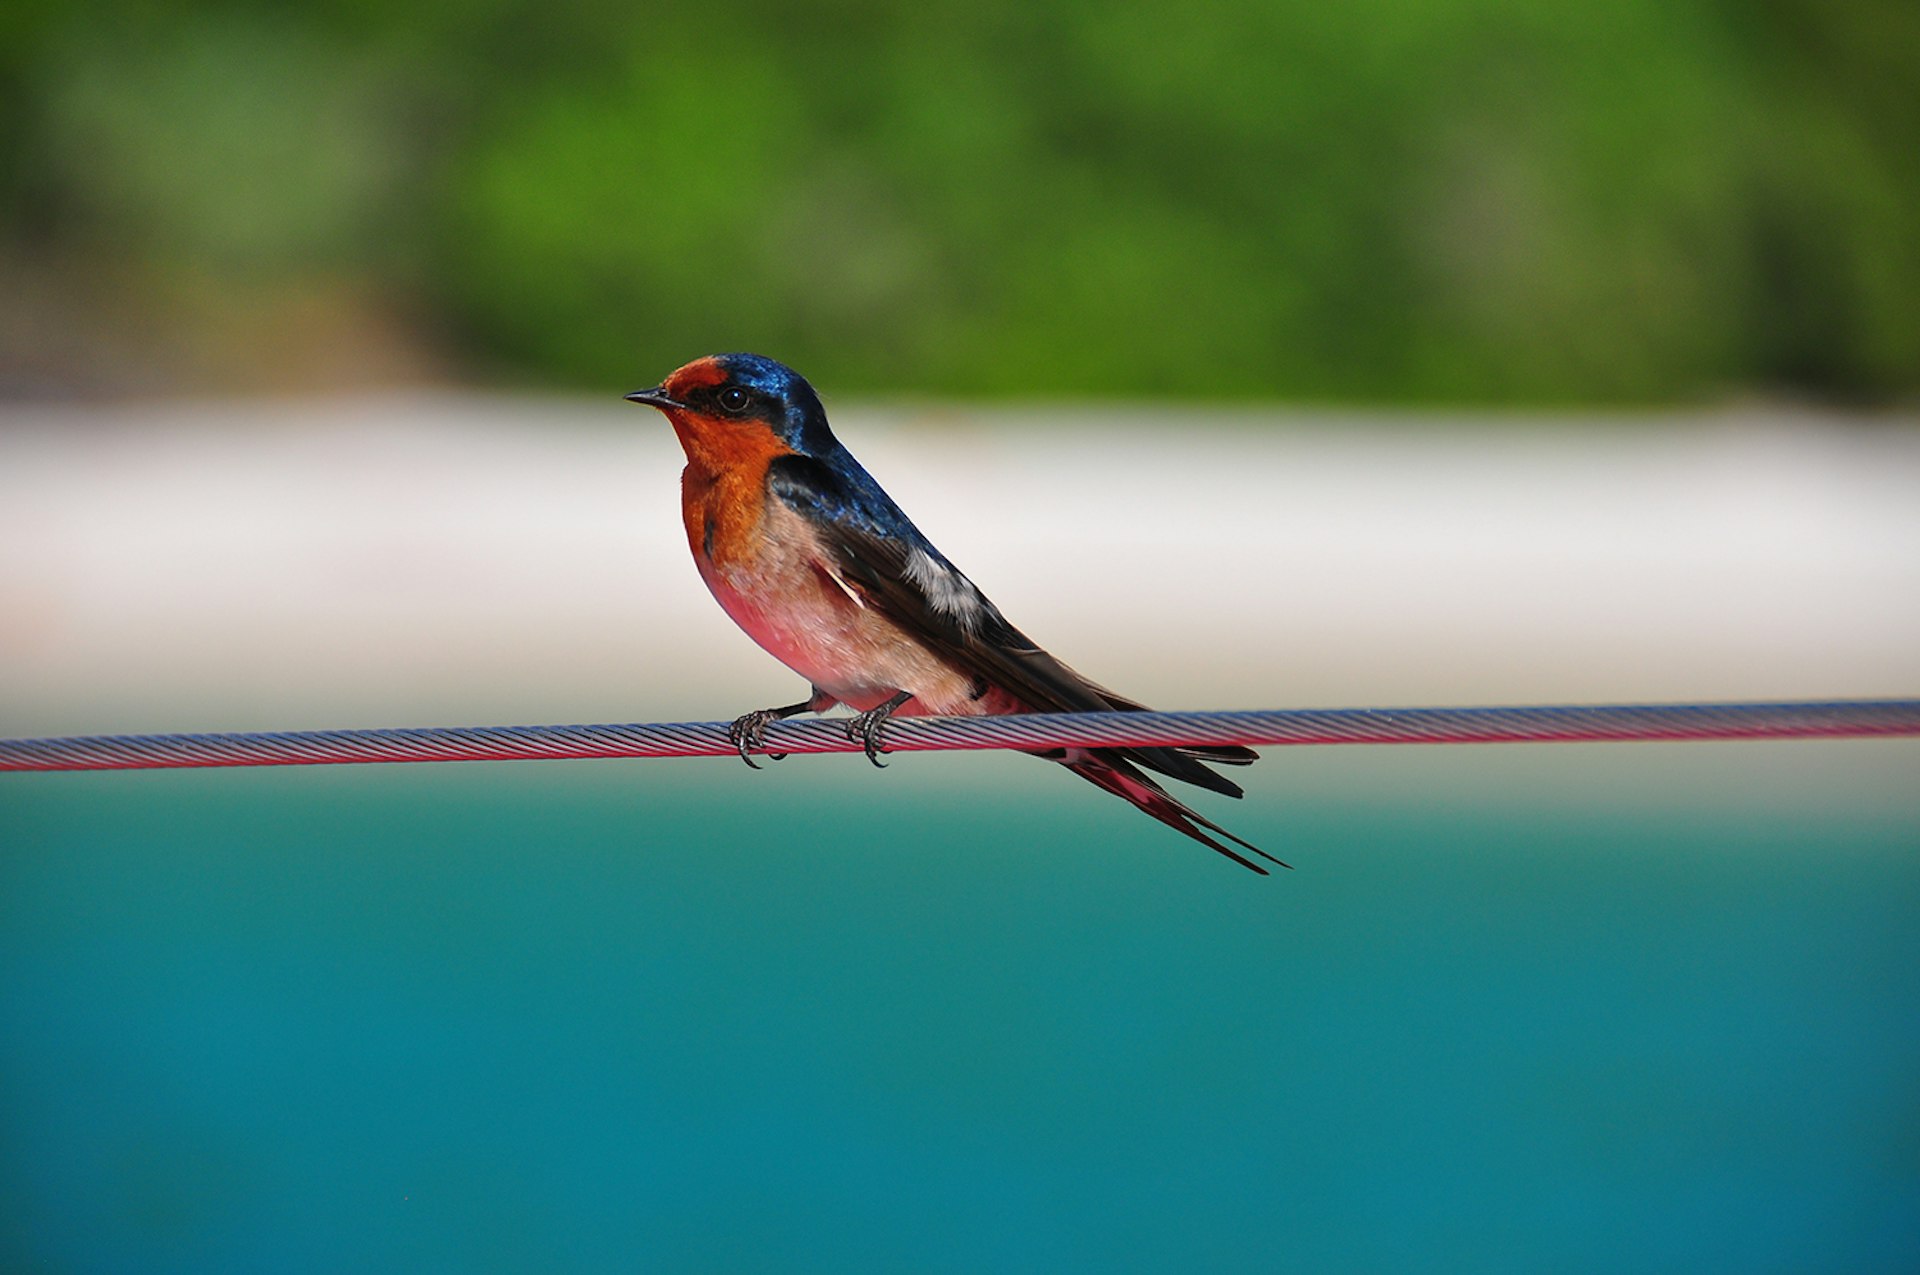 A welcome swallow perched on a sailboat in the Whitsunday Islands. Image by Matt Gillman / CC BY 2.0